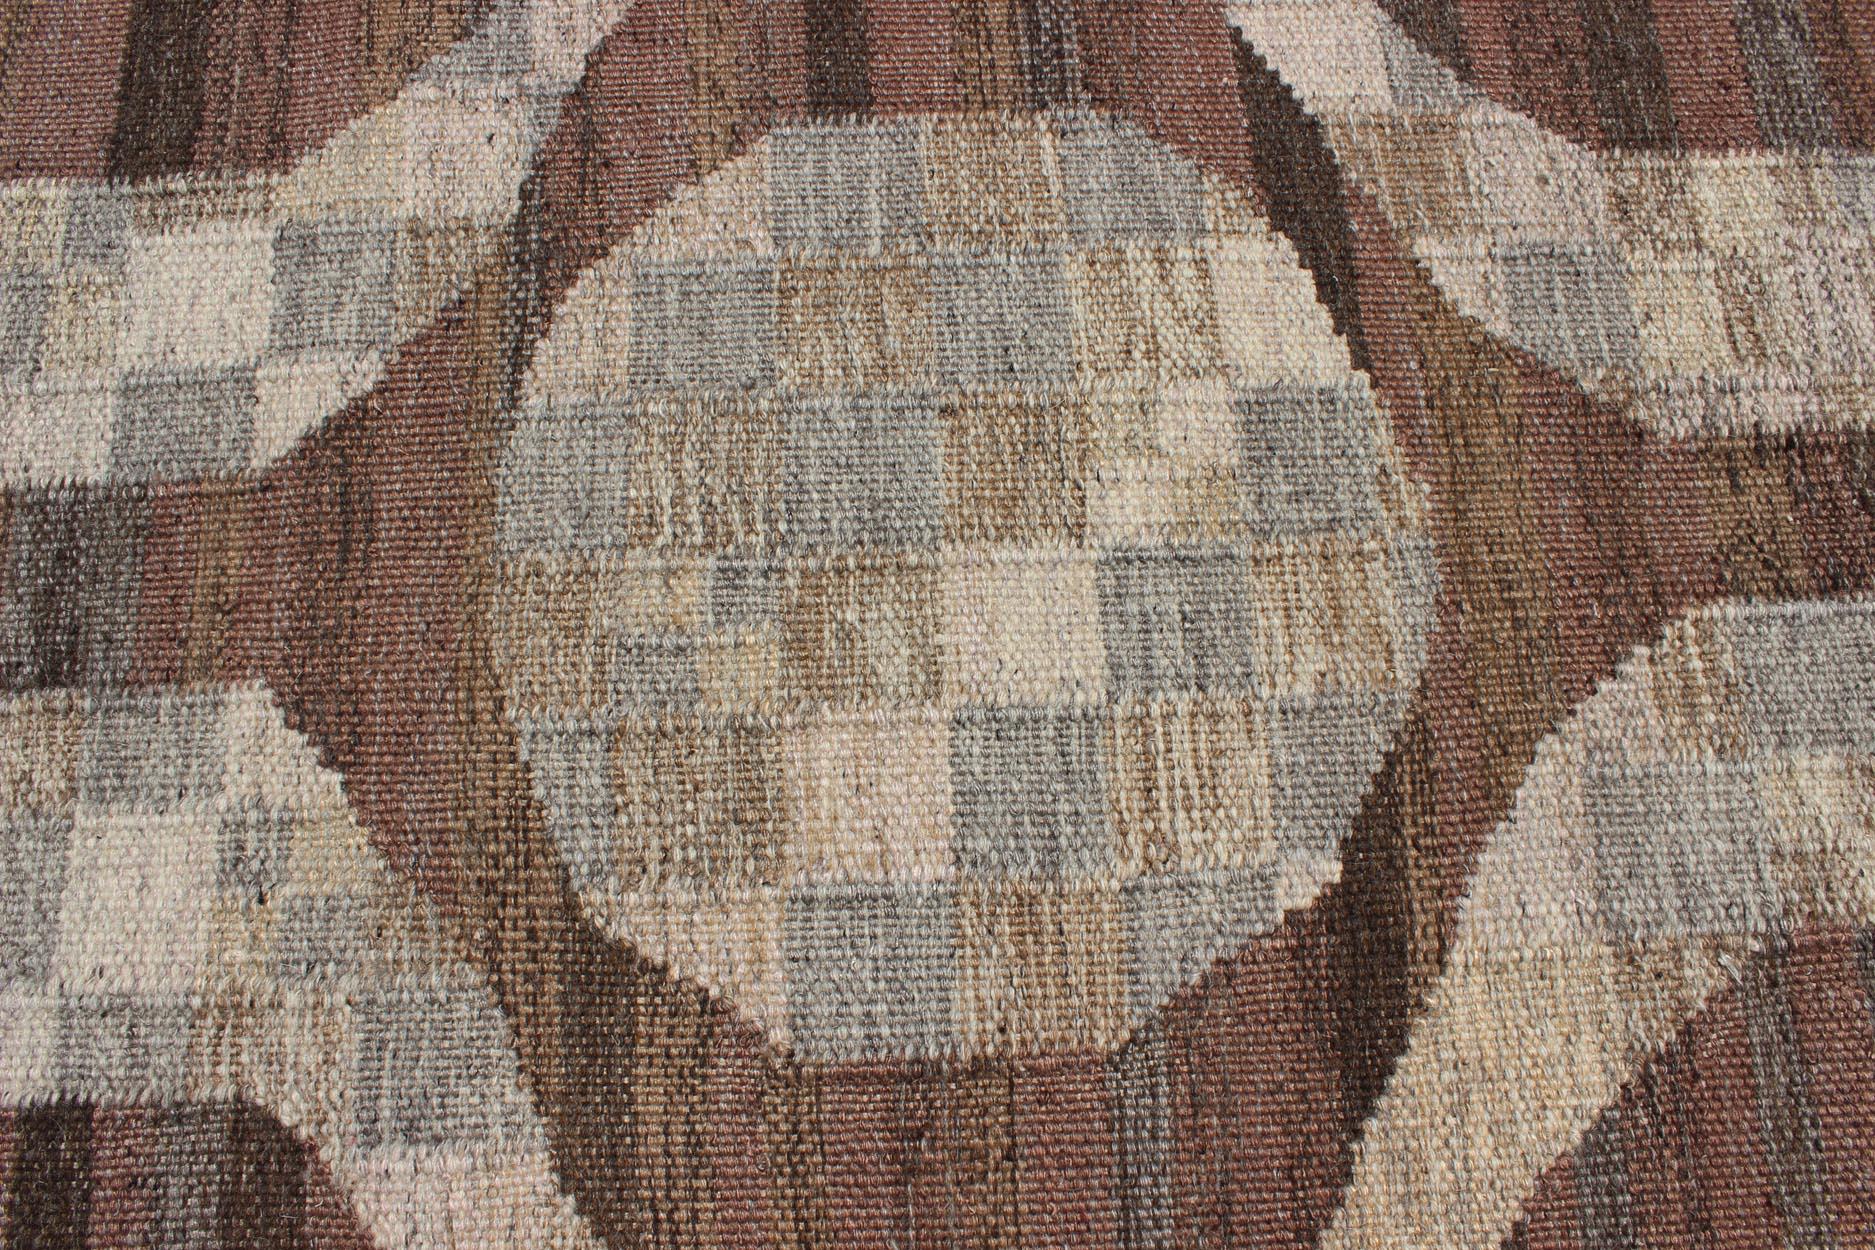 Scandinavian Flat-Weave Rug With Modern Design in Brown, Coffee, Gray, Cream In Excellent Condition For Sale In Atlanta, GA